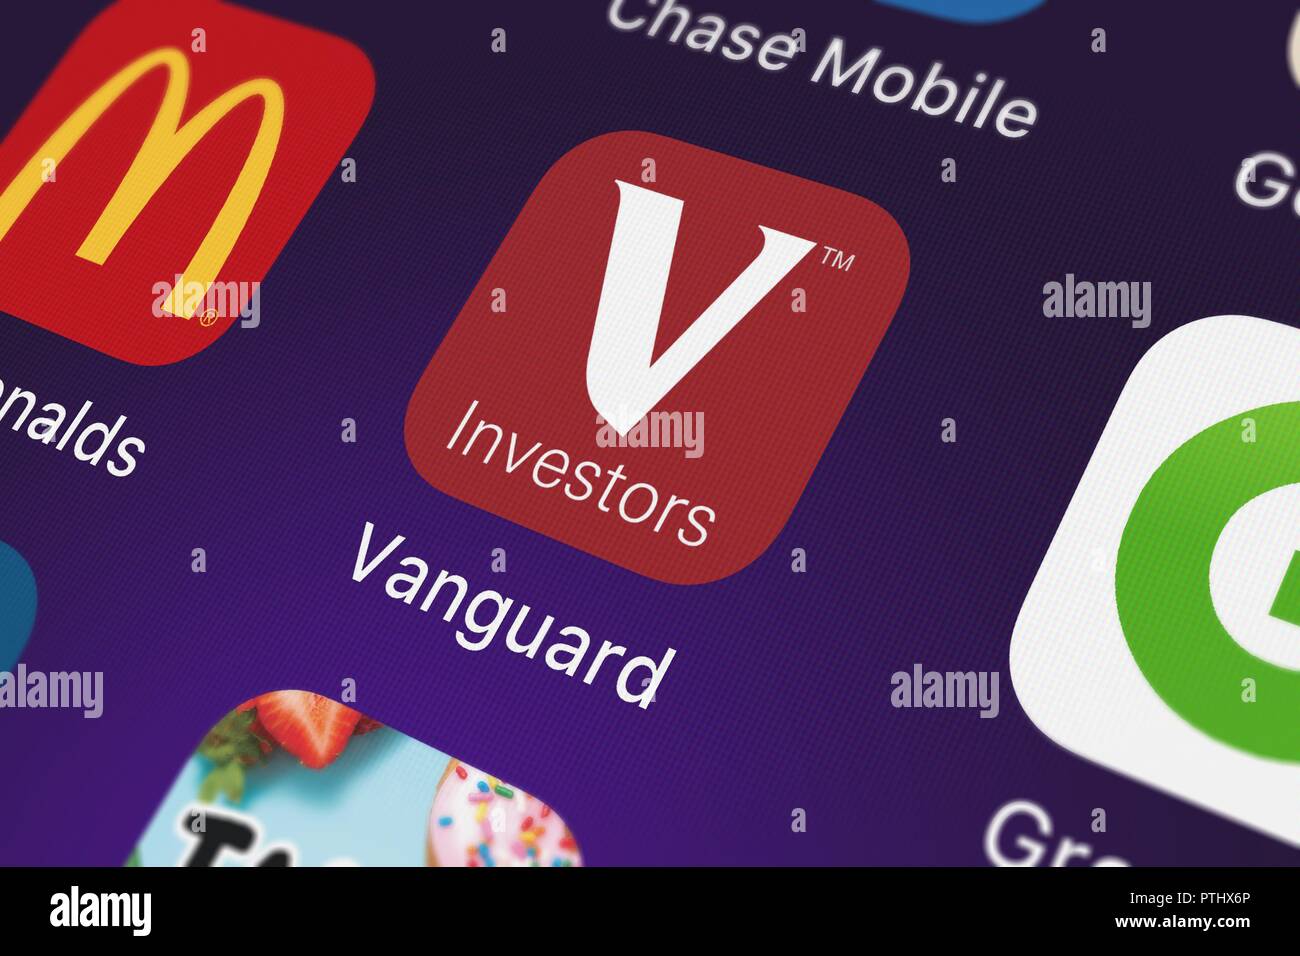 London, United Kingdom - October 09, 2018: Close-up shot of the Vanguard mobile app from The Vanguard Group, Inc.. Stock Photo